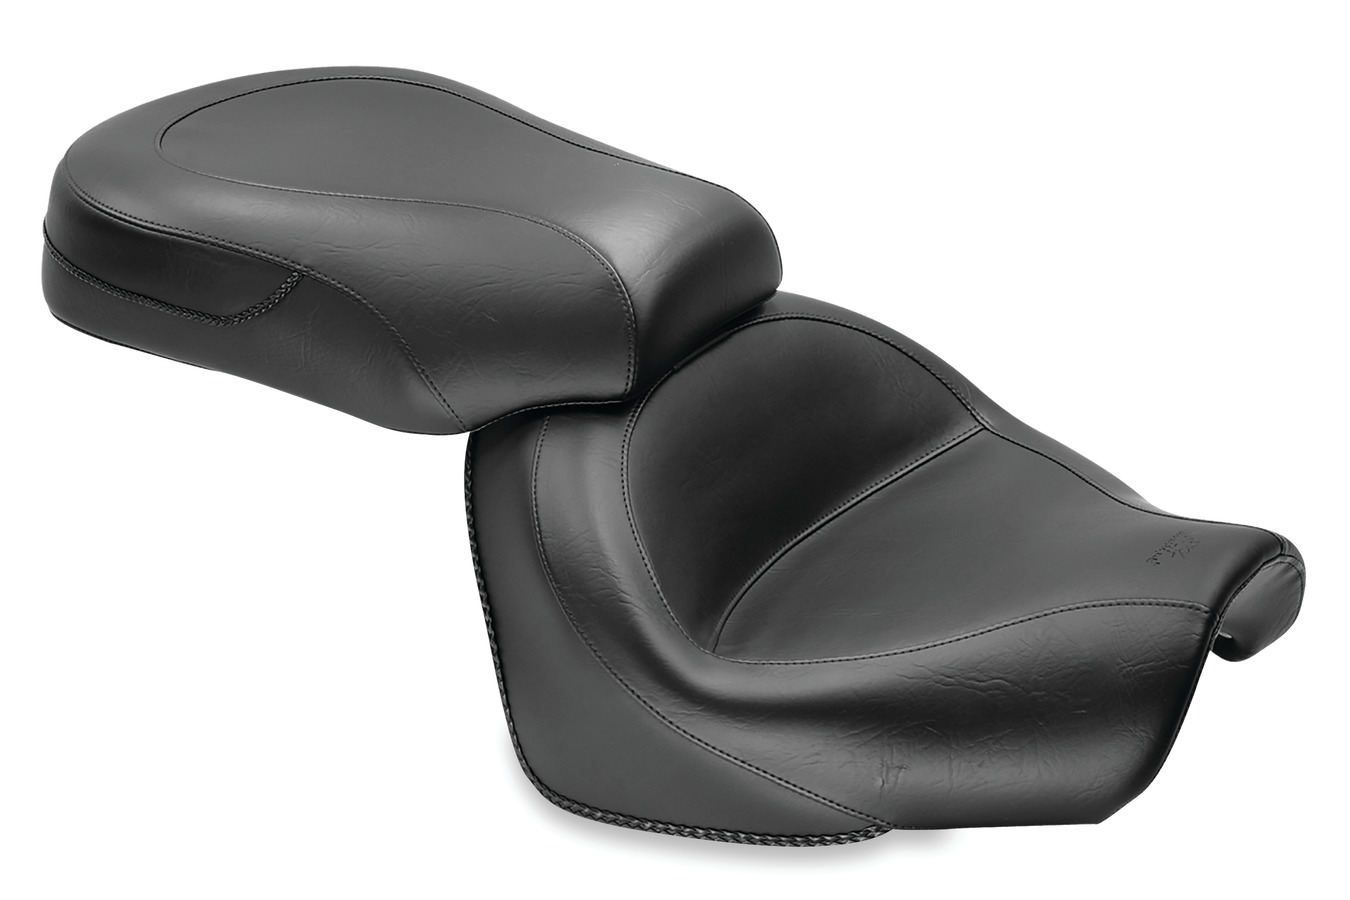 Standard Touring Two-Piece Seat for Yamaha V-Star 950 & 950 Tourer 2009-